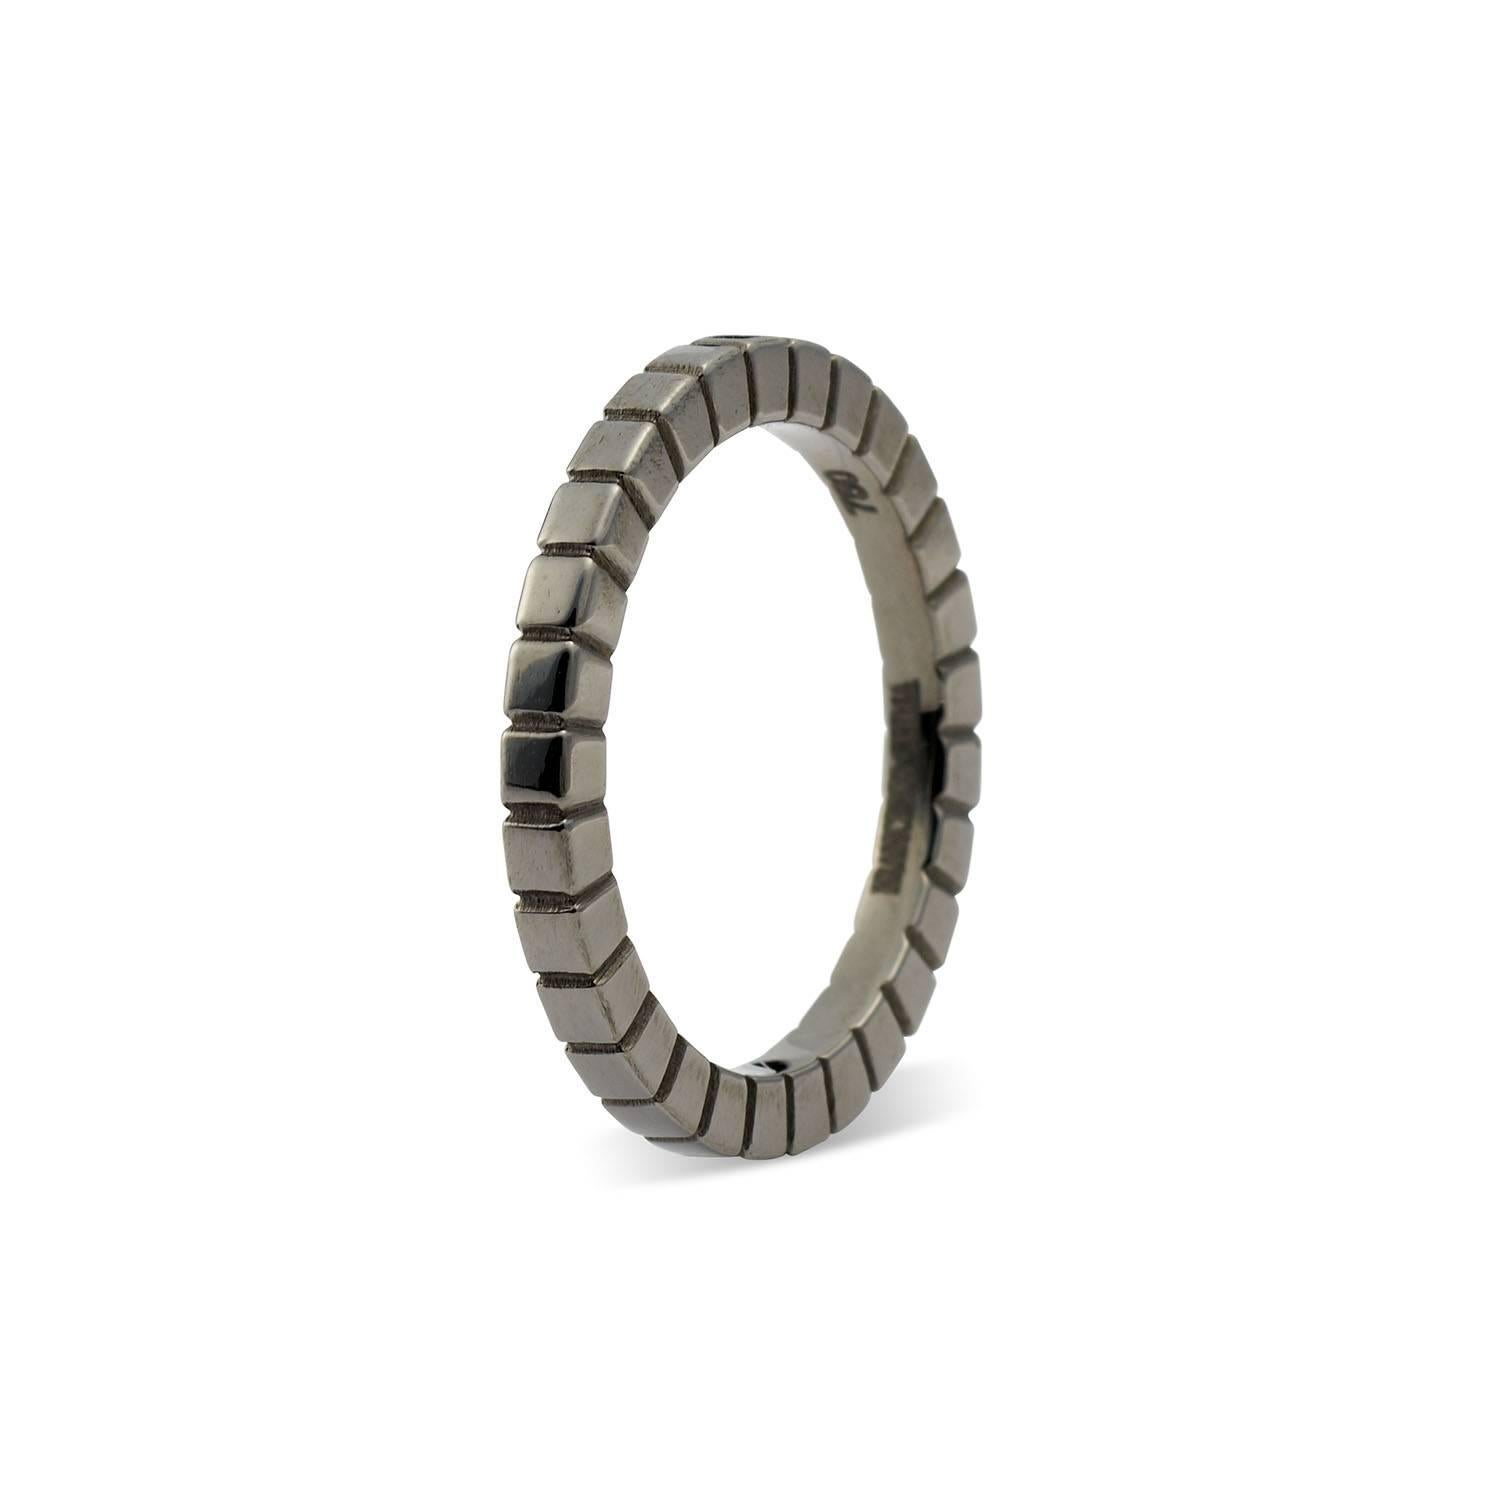 18ct. blackened gold Pixel Band ring by Francesca Grima

French Size 46  UK Size H 1/2  US Size 4

Signed Francesca Grima, 750

About Francesca Grima 
Born into a family that has a long tradition in fine jewellery – her great-great grandfather Sir